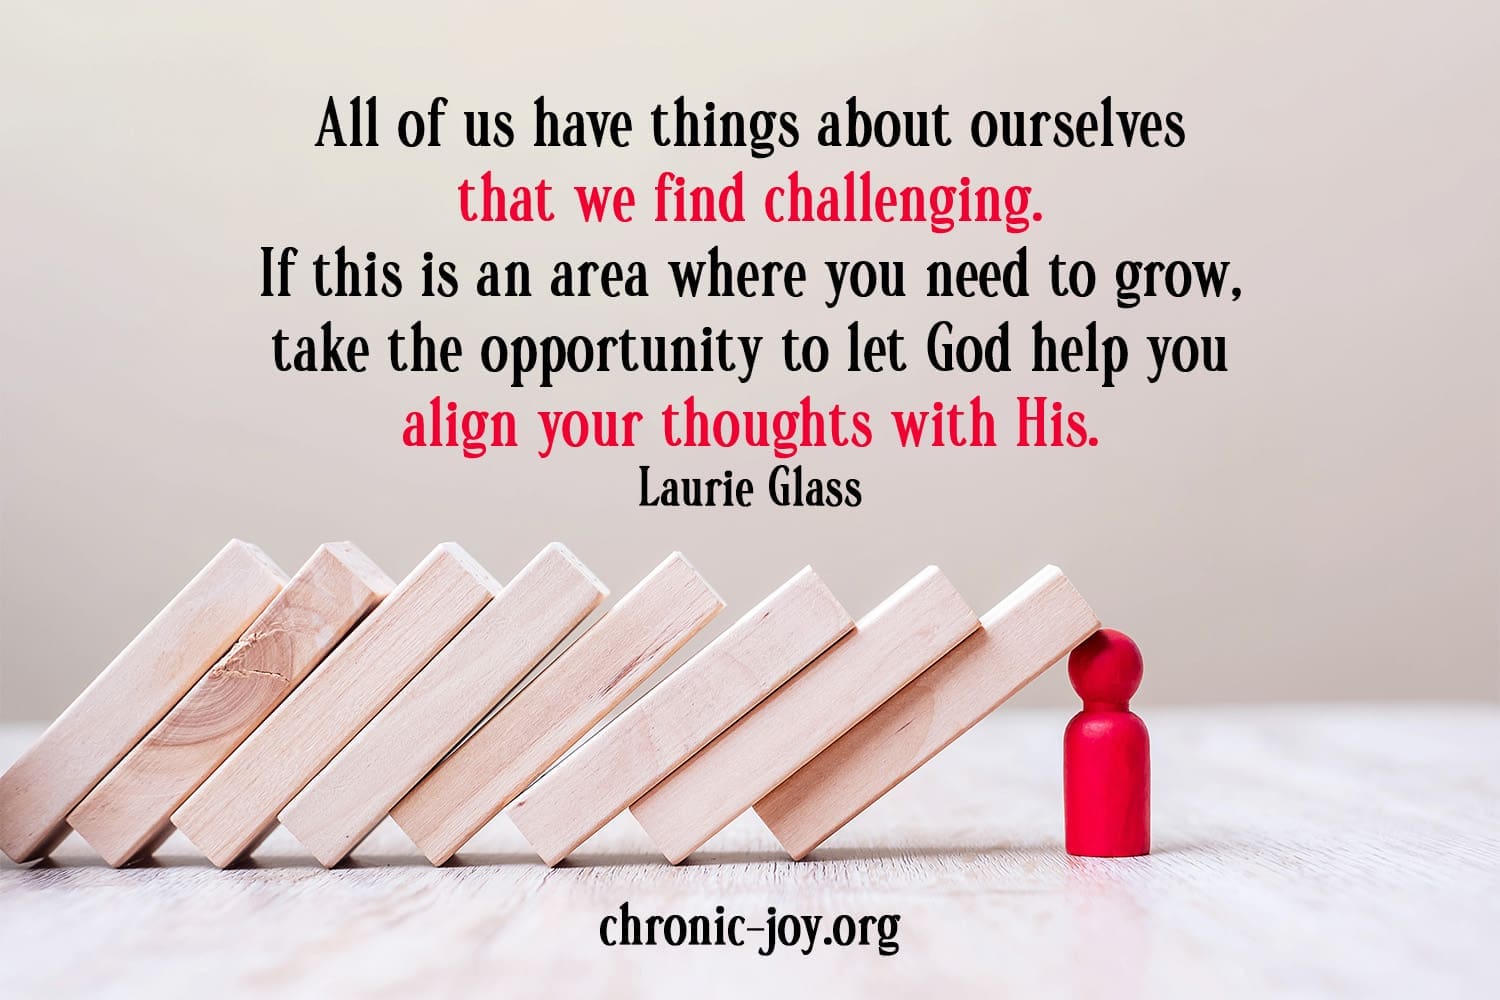 "All of us have things about ourselves that we find challenging. If this is an area where you need to grow, take the opportunity to let God help you align your thoughts with His." Laurie Glass